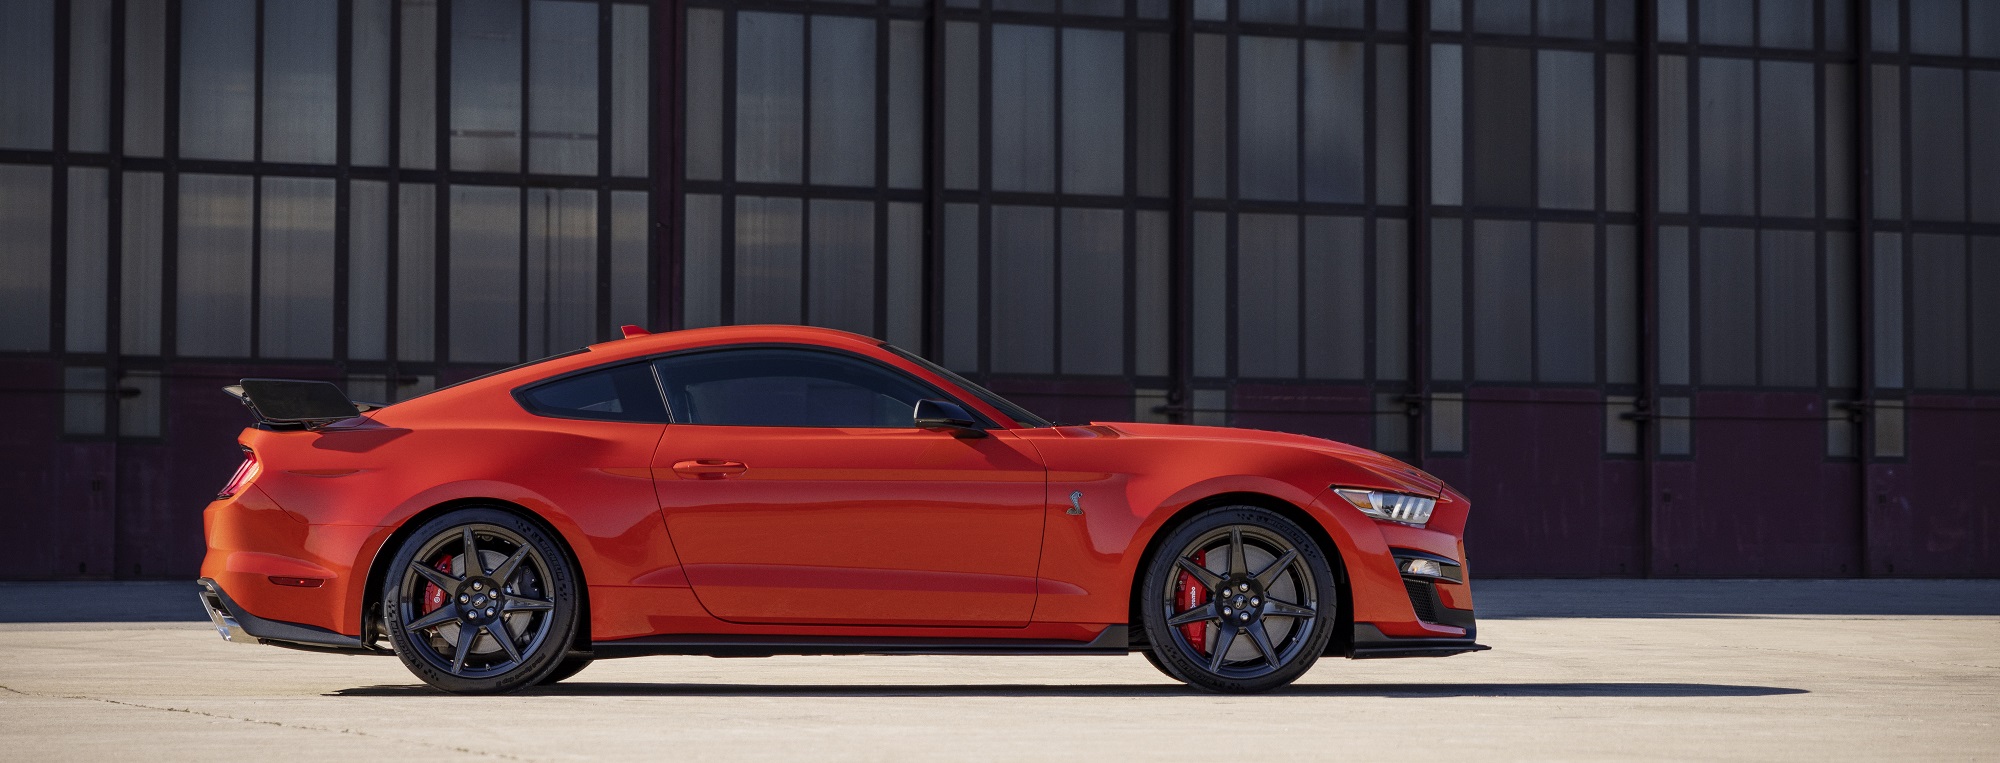 The S550 Shelby GT500 is one of the few Ford Mustangs that out-muscles the new Mustang Dark Horse.